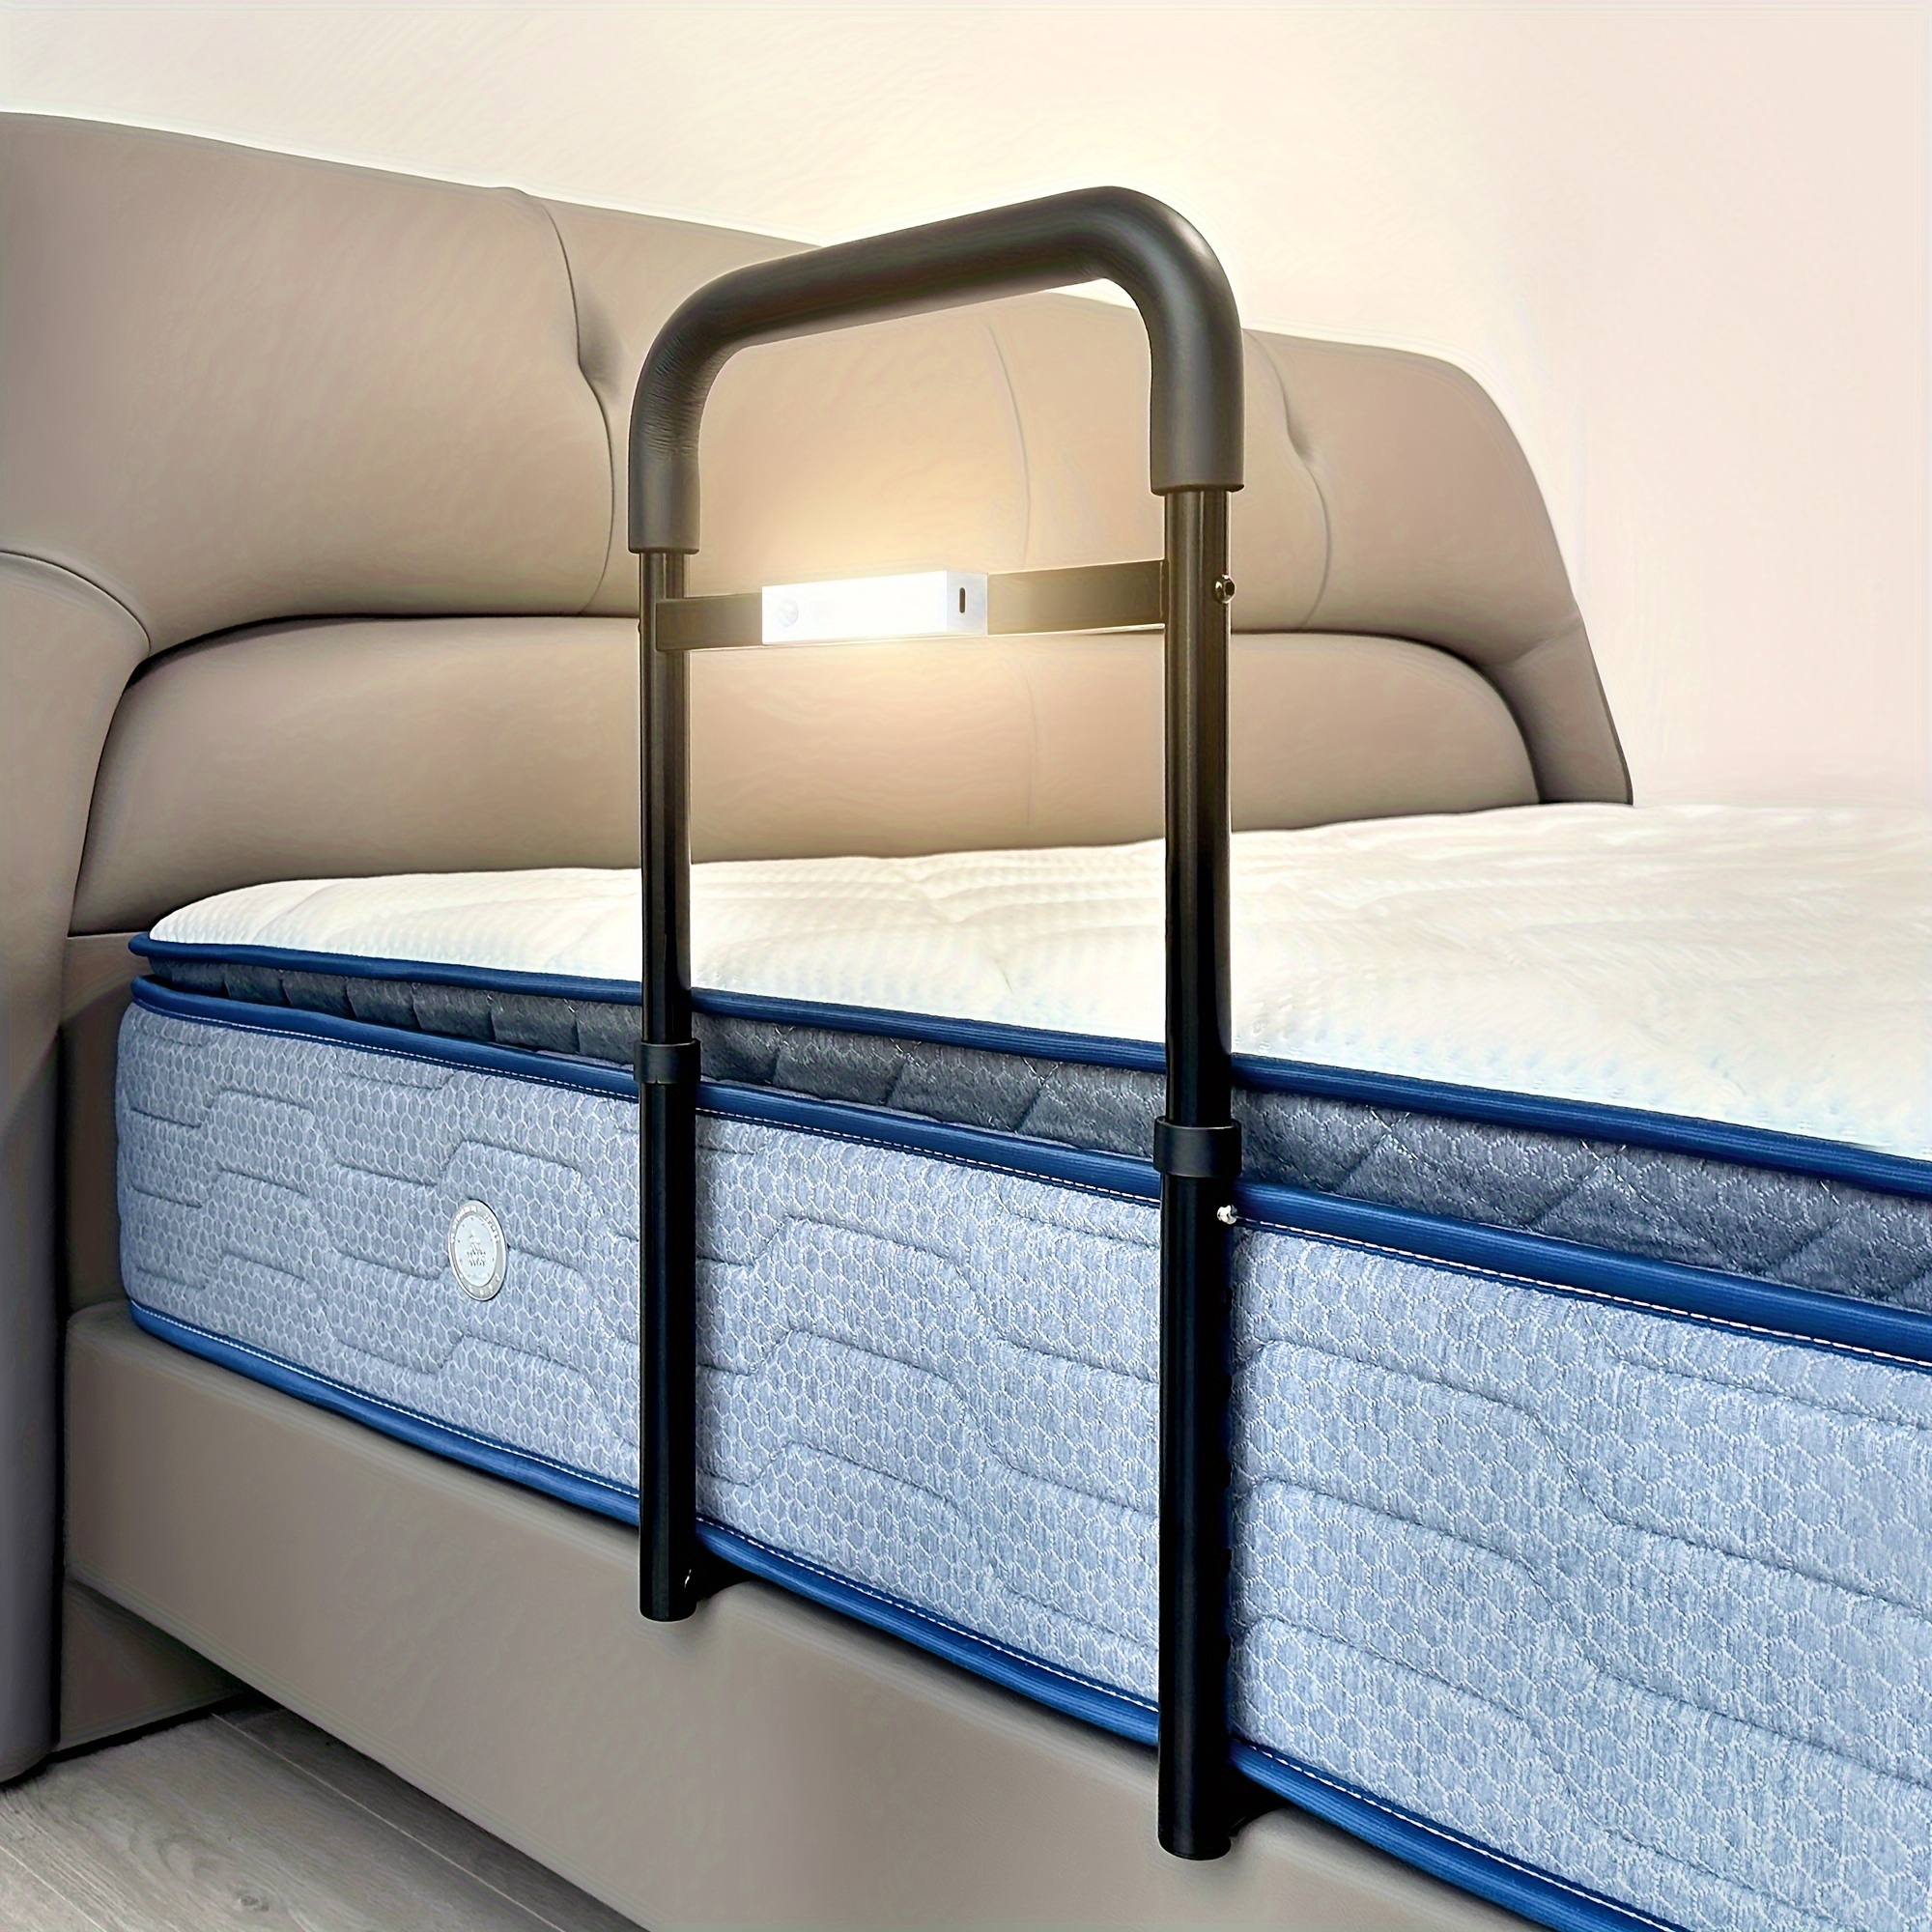 

C1 Bed Rails For Elderly Adults Safety - Adjustable Heights Bed Cane With Non-slip Ergonomic Handle, Stable Bed Assist Rails With Motion Light For Seniors Bedside Fall, Fits King Queen Twin Bed